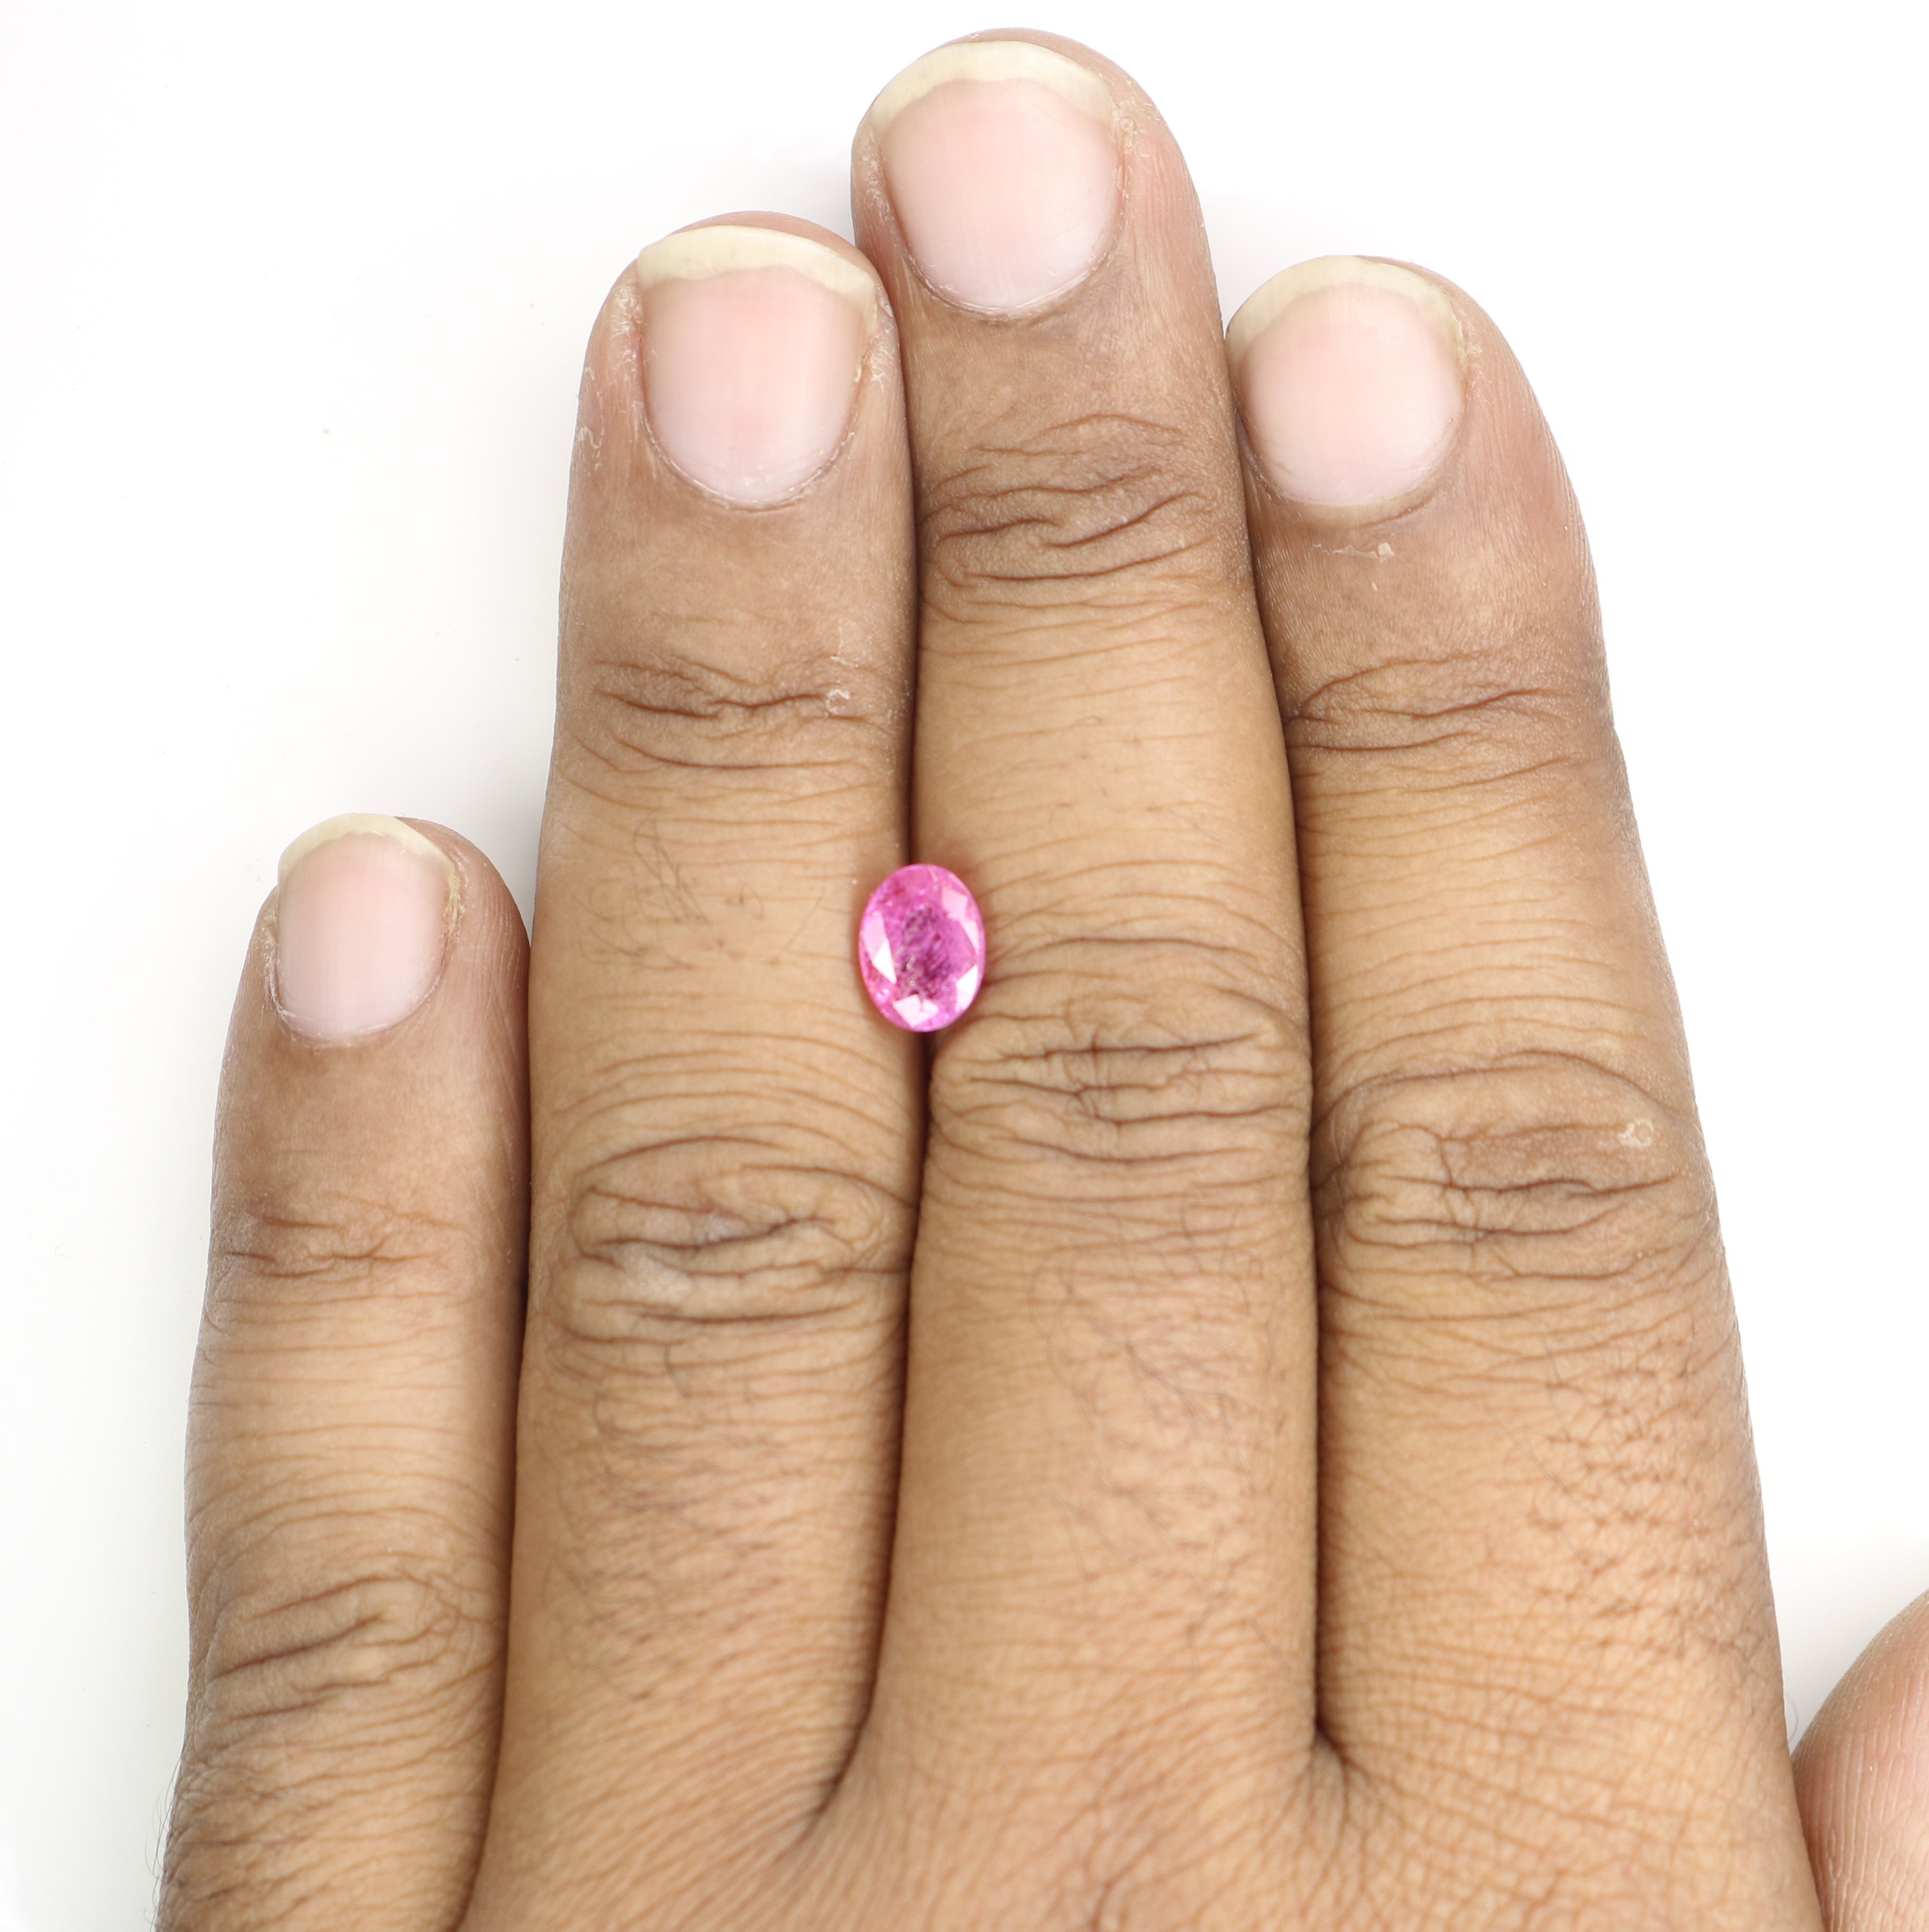 1.97 CT Oval Shape Loose Ruby Sapphire Gemstone For Designer Jewelry